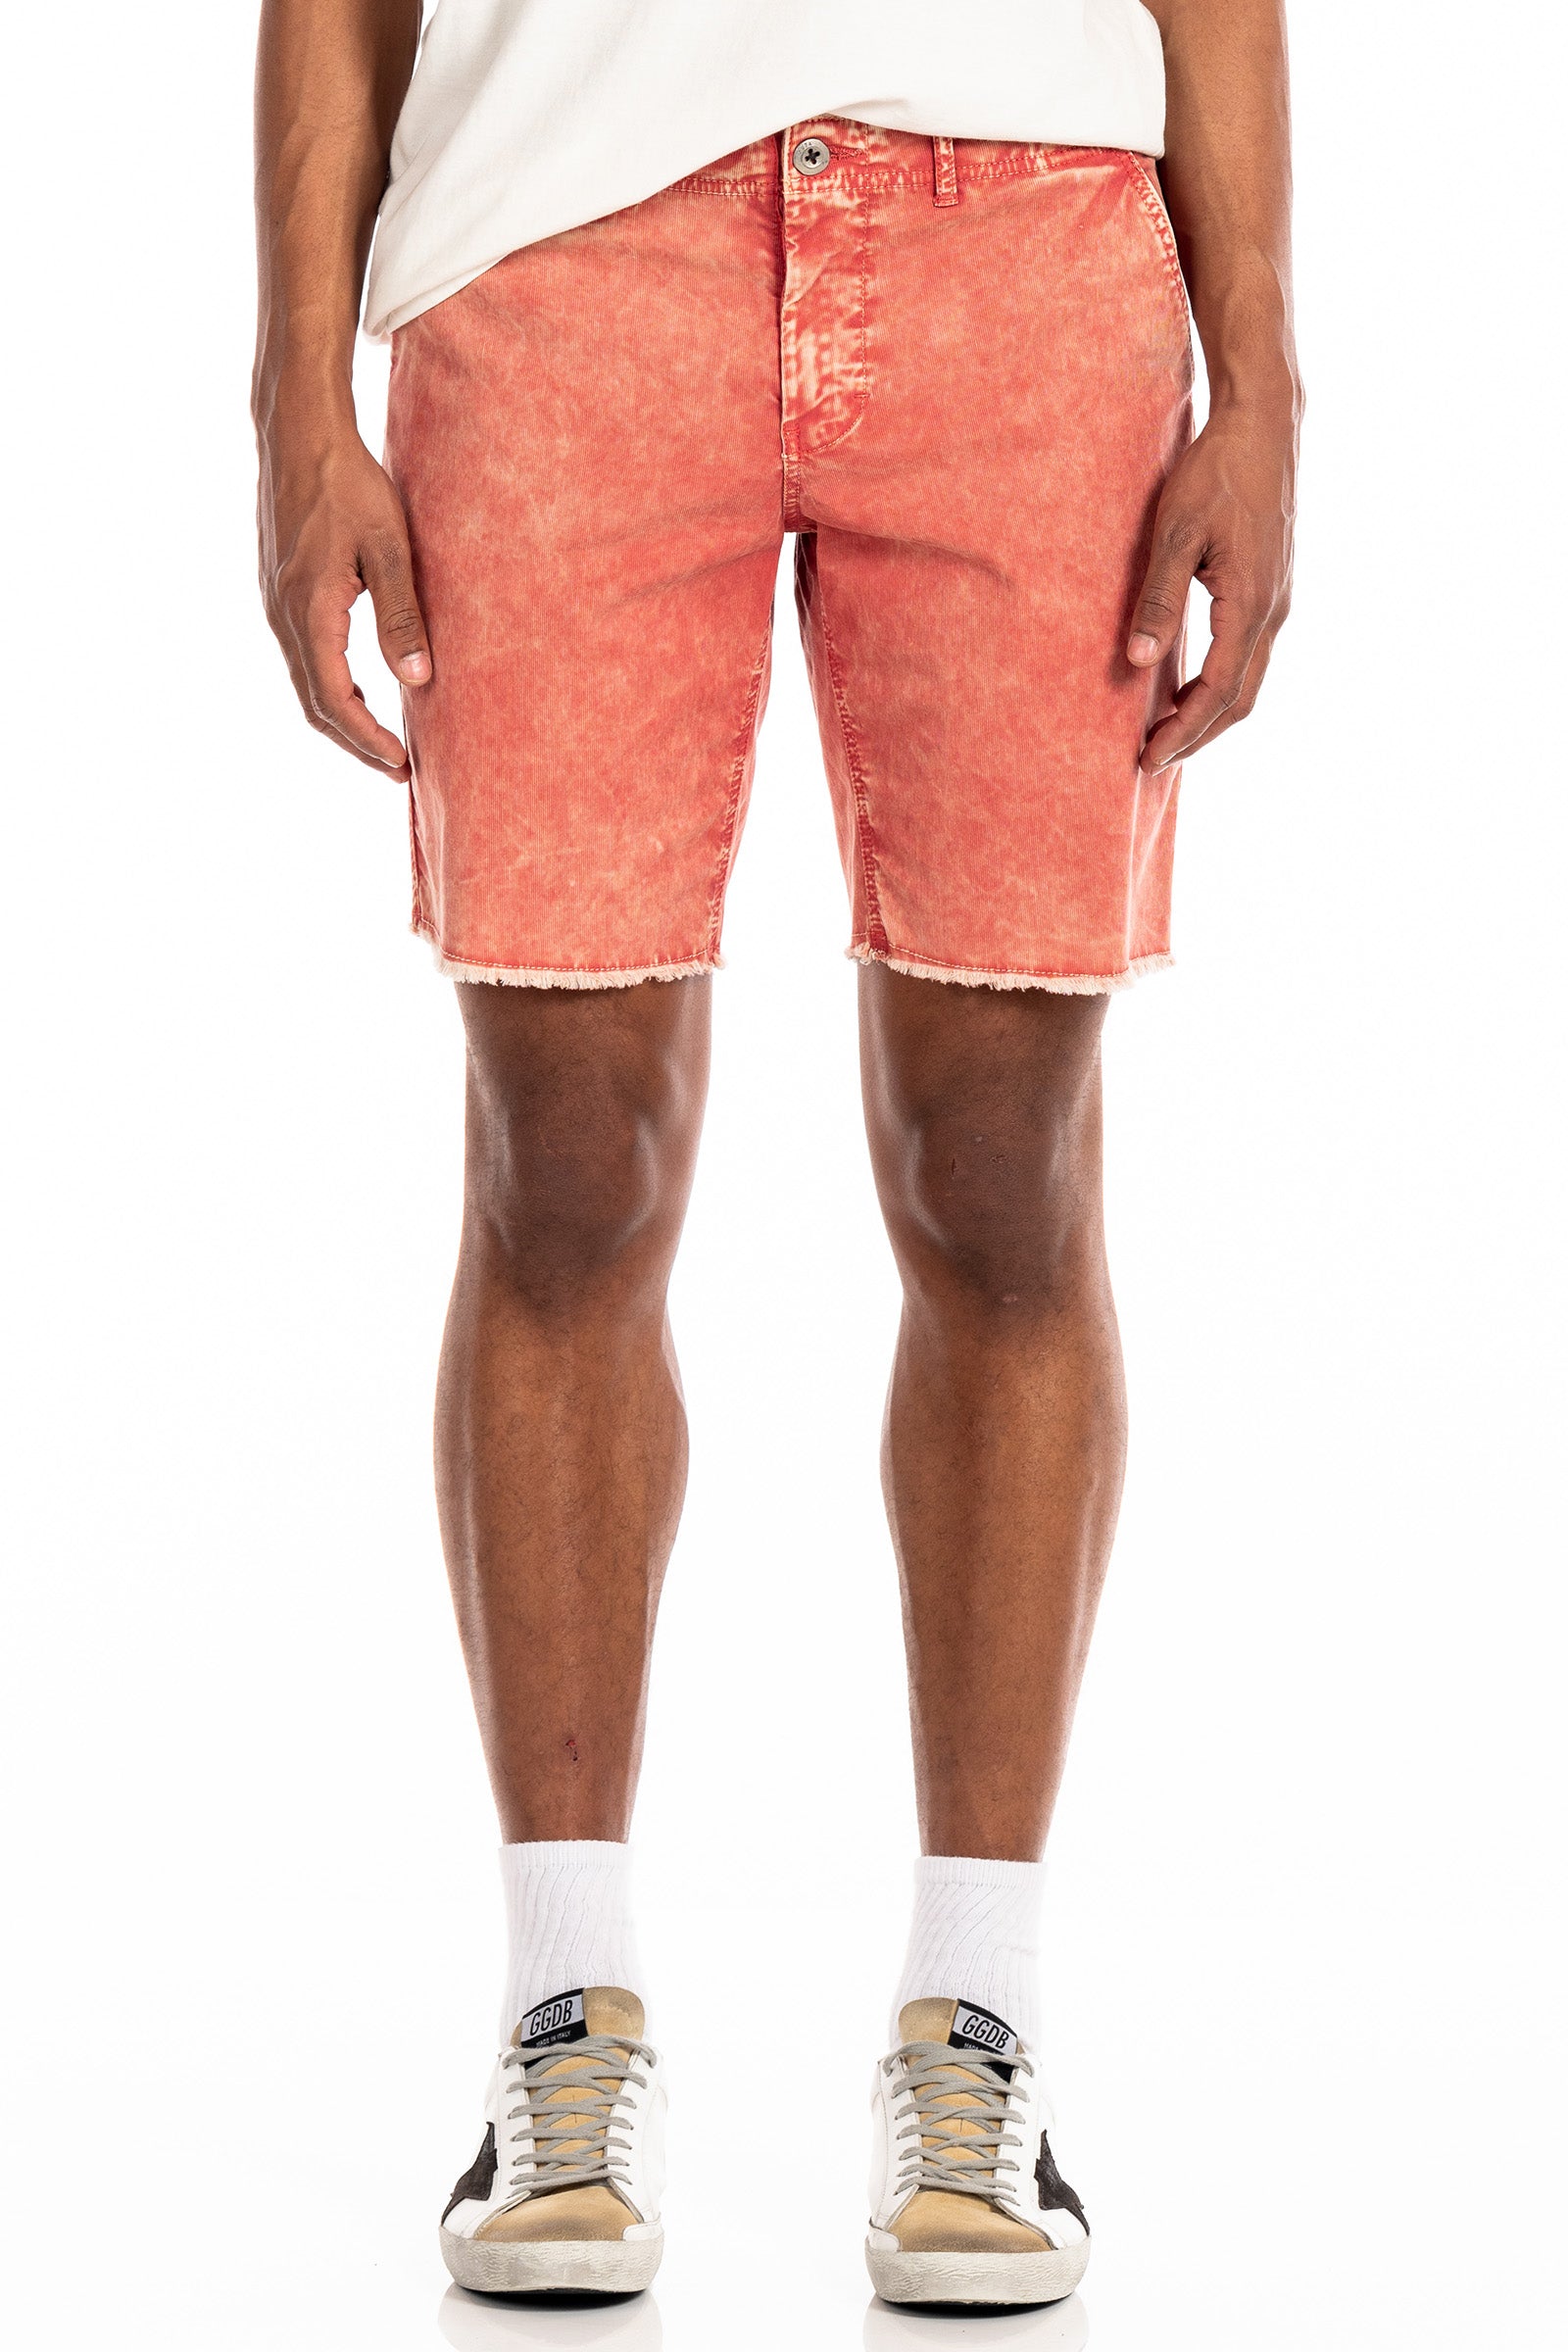 Original Paperbacks Brentwood Mineral Chino Short in Tangerine on Model Cropped Front View